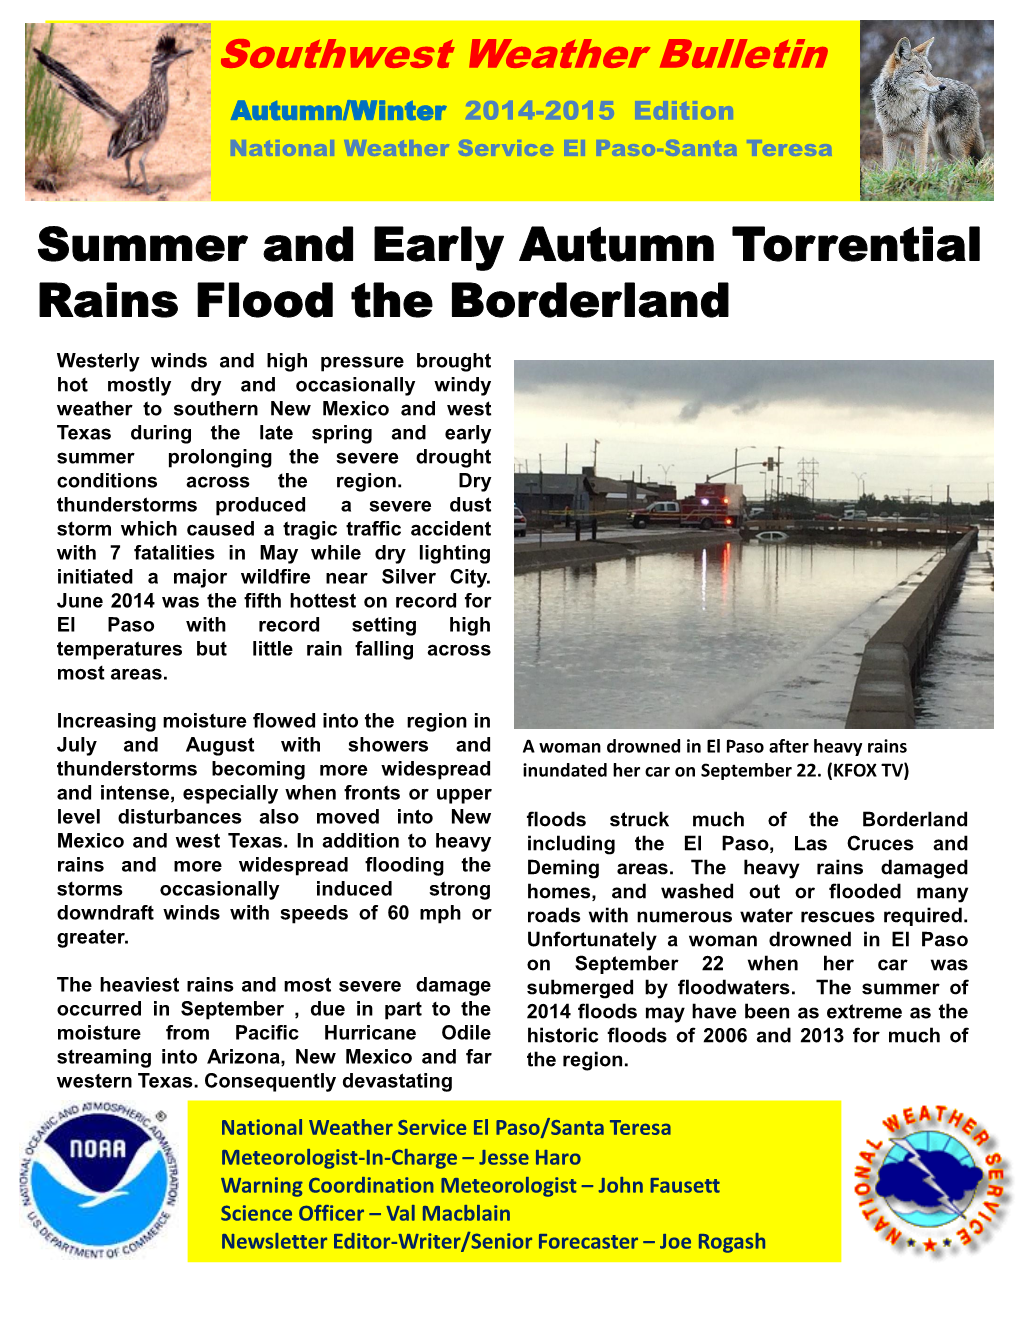 Summer and Early Autumn Torrential Rains Flood the Borderland